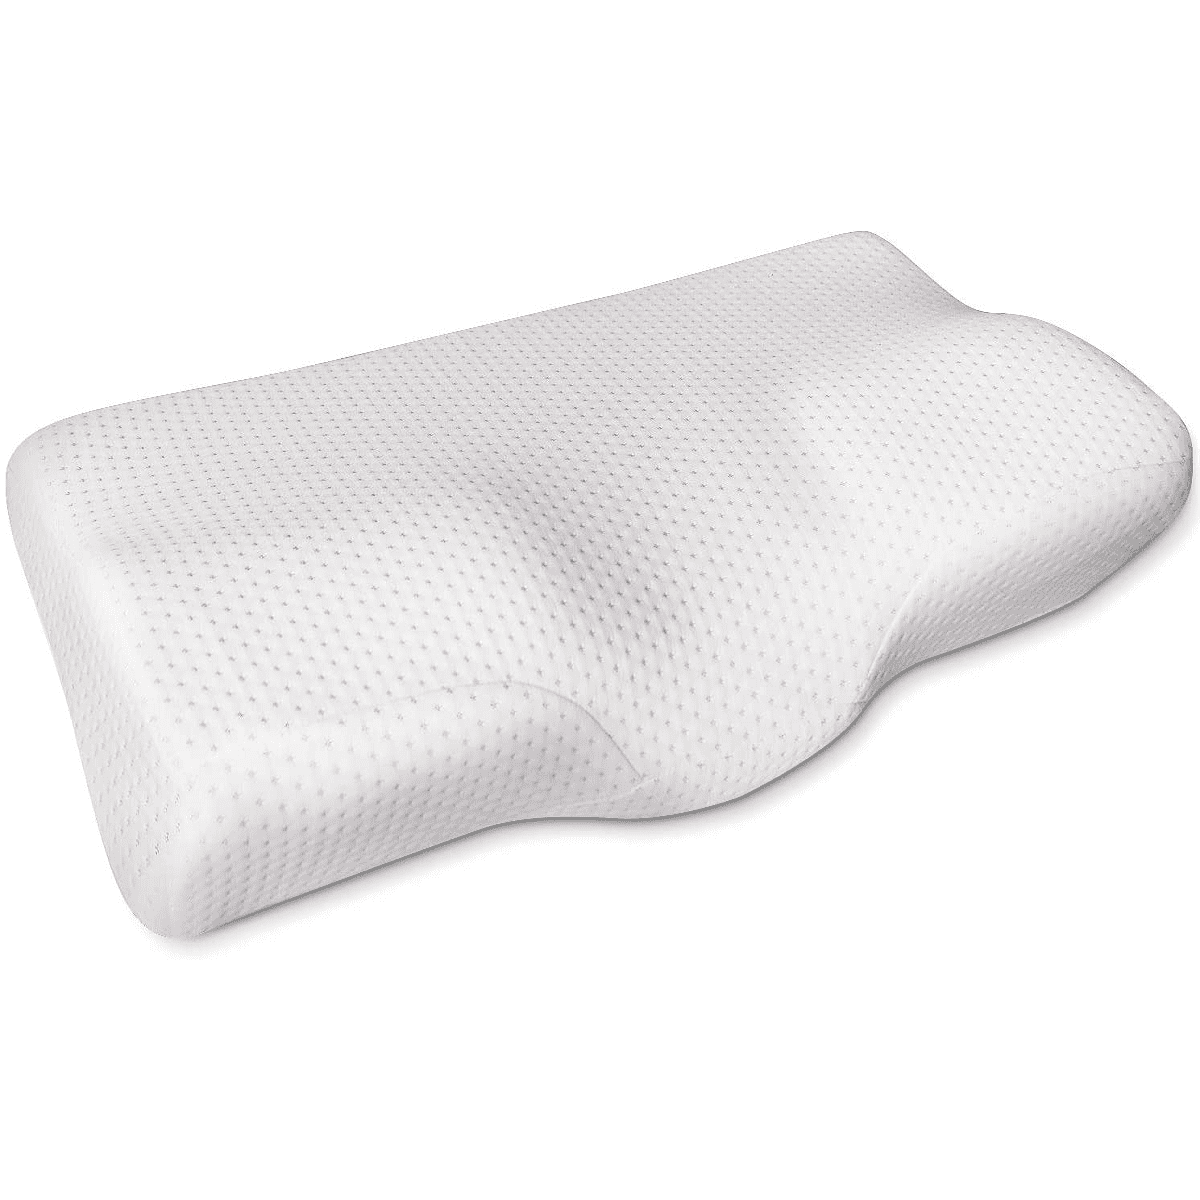 neck support pillow for back and side sleepers